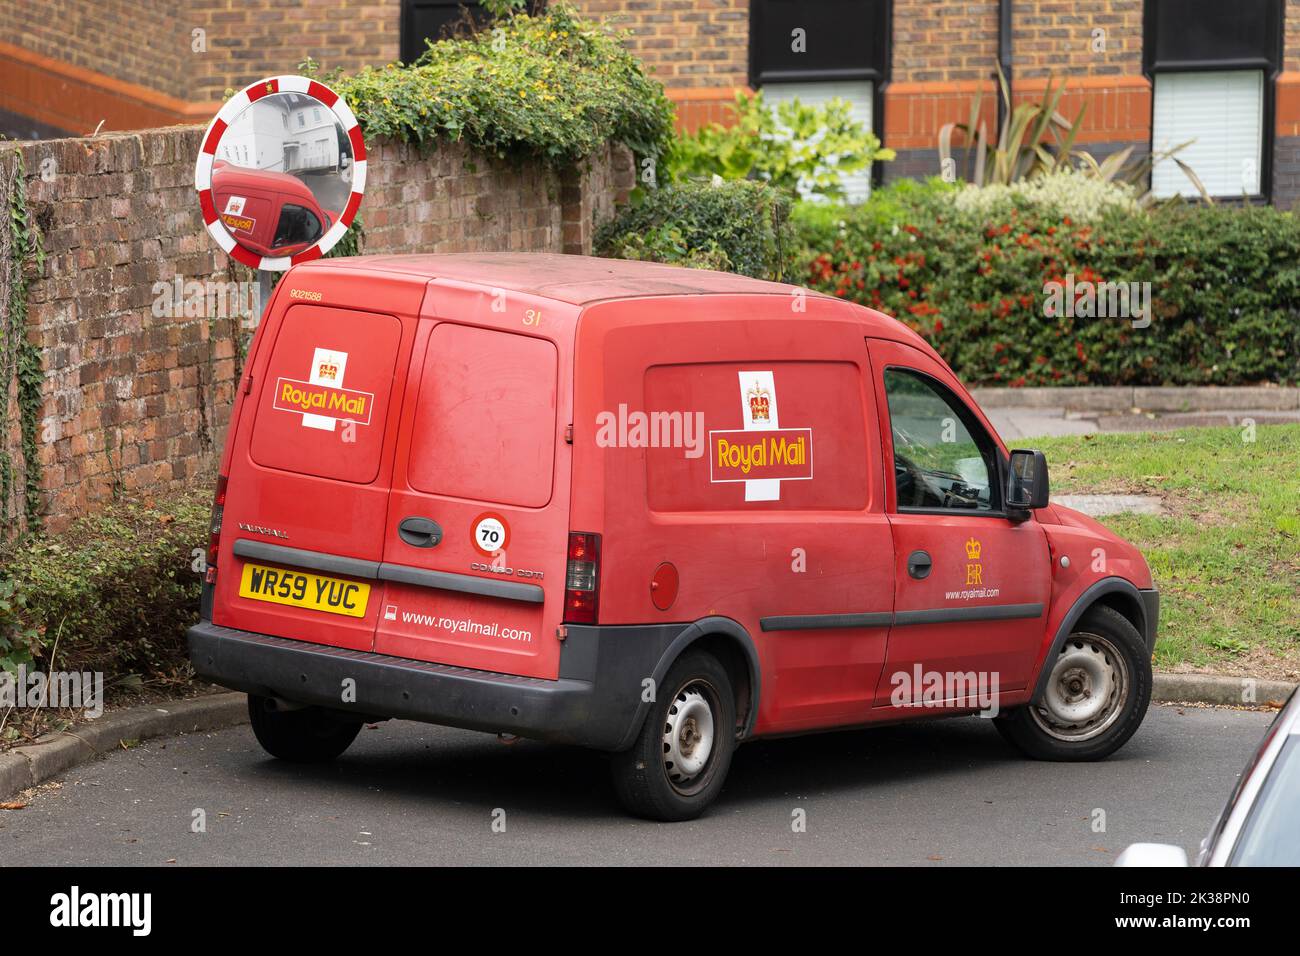 Royal Mail Group red delivery van with traditional logo. England, UK. Concept - Royal Mail brand, postal service, mail collection, parcel delivery Stock Photo